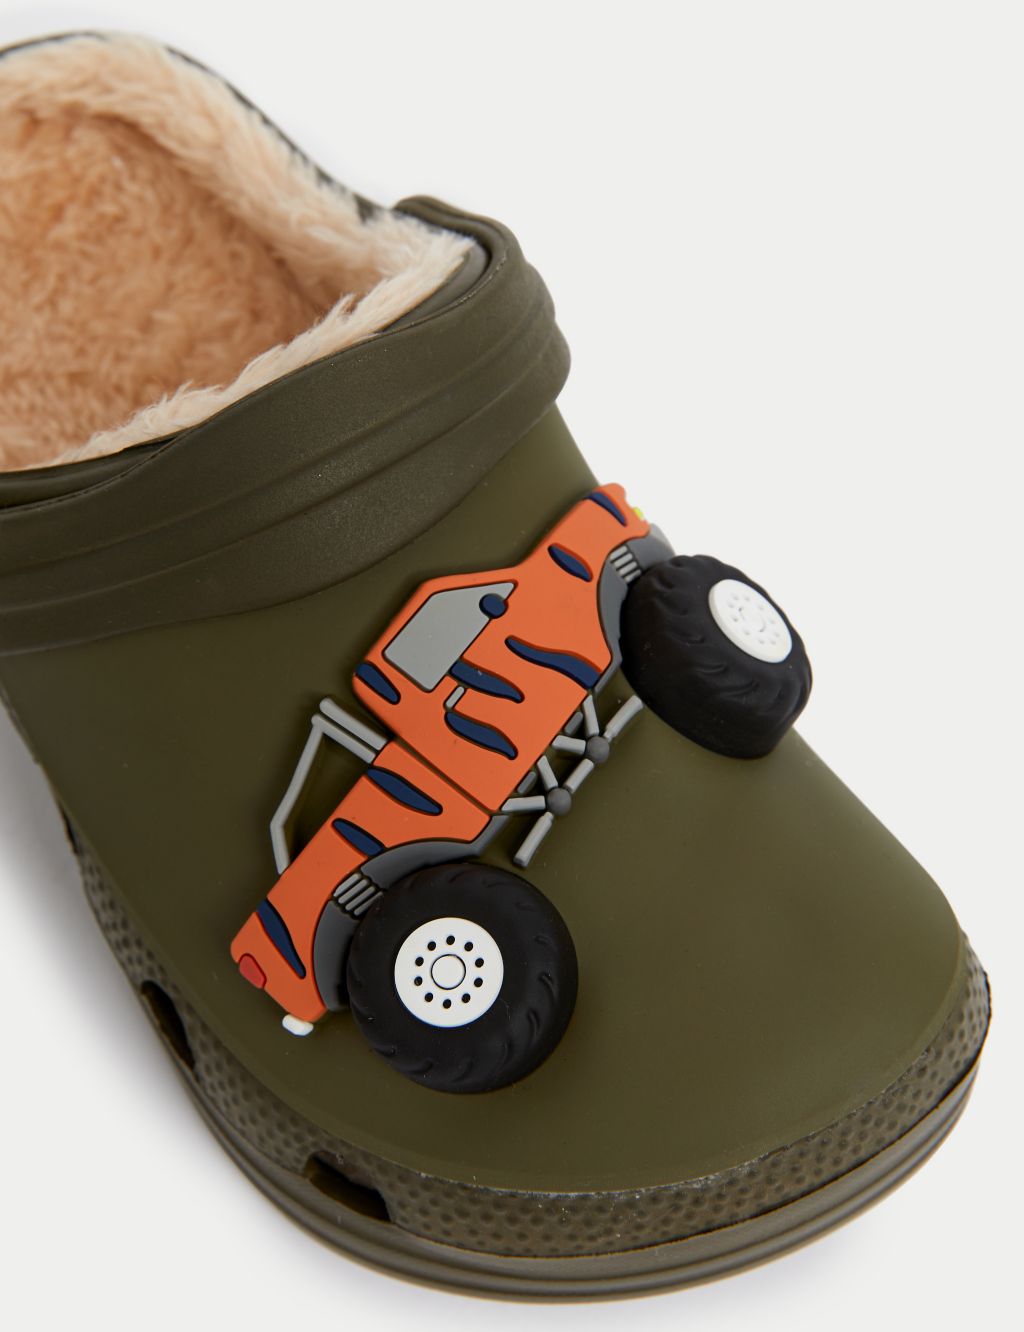 Kids' Monster Truck Clogs (4 Small - 13 Small) image 3